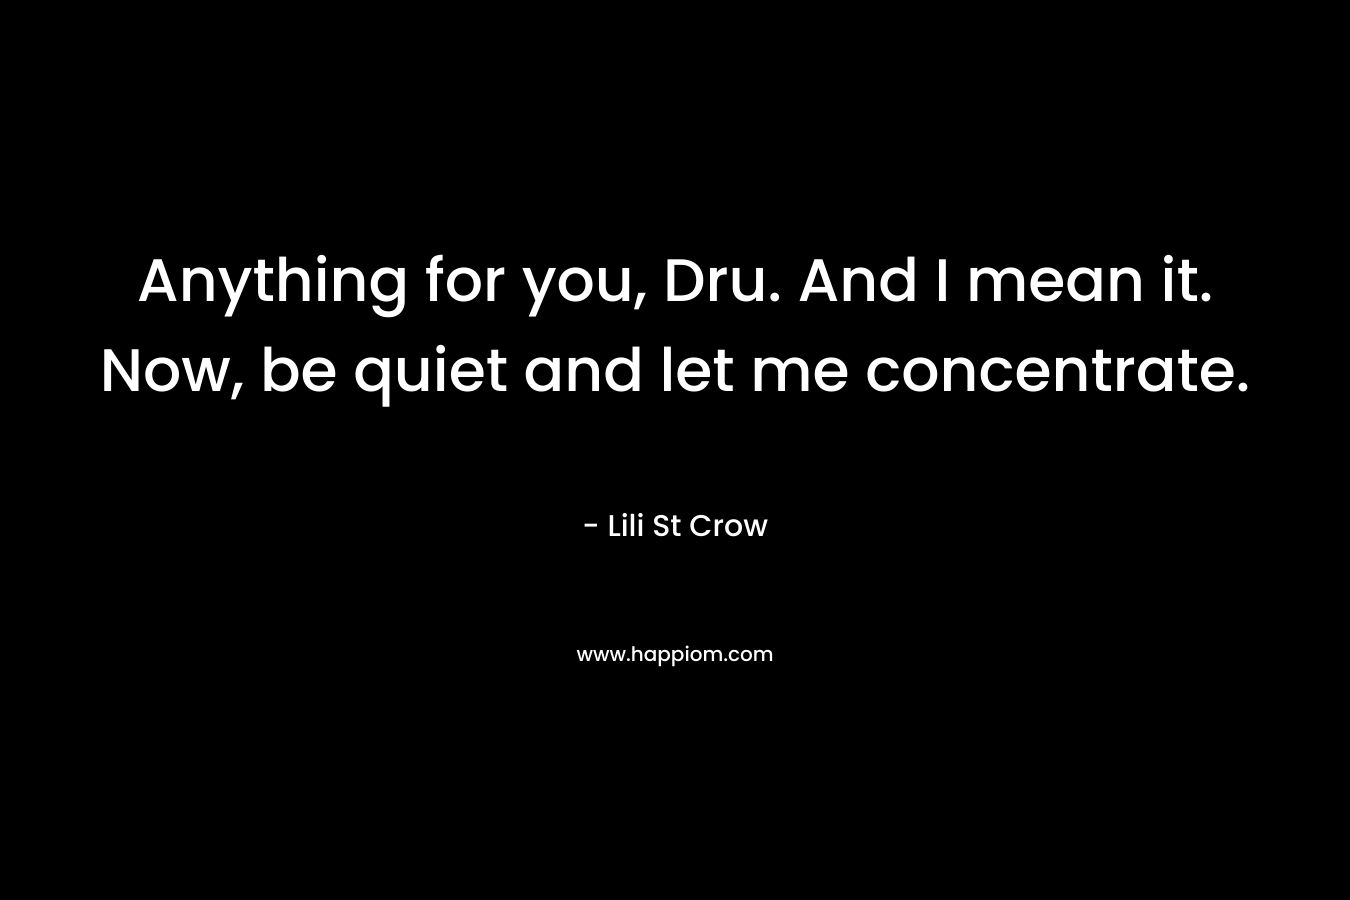 Anything for you, Dru. And I mean it. Now, be quiet and let me concentrate.